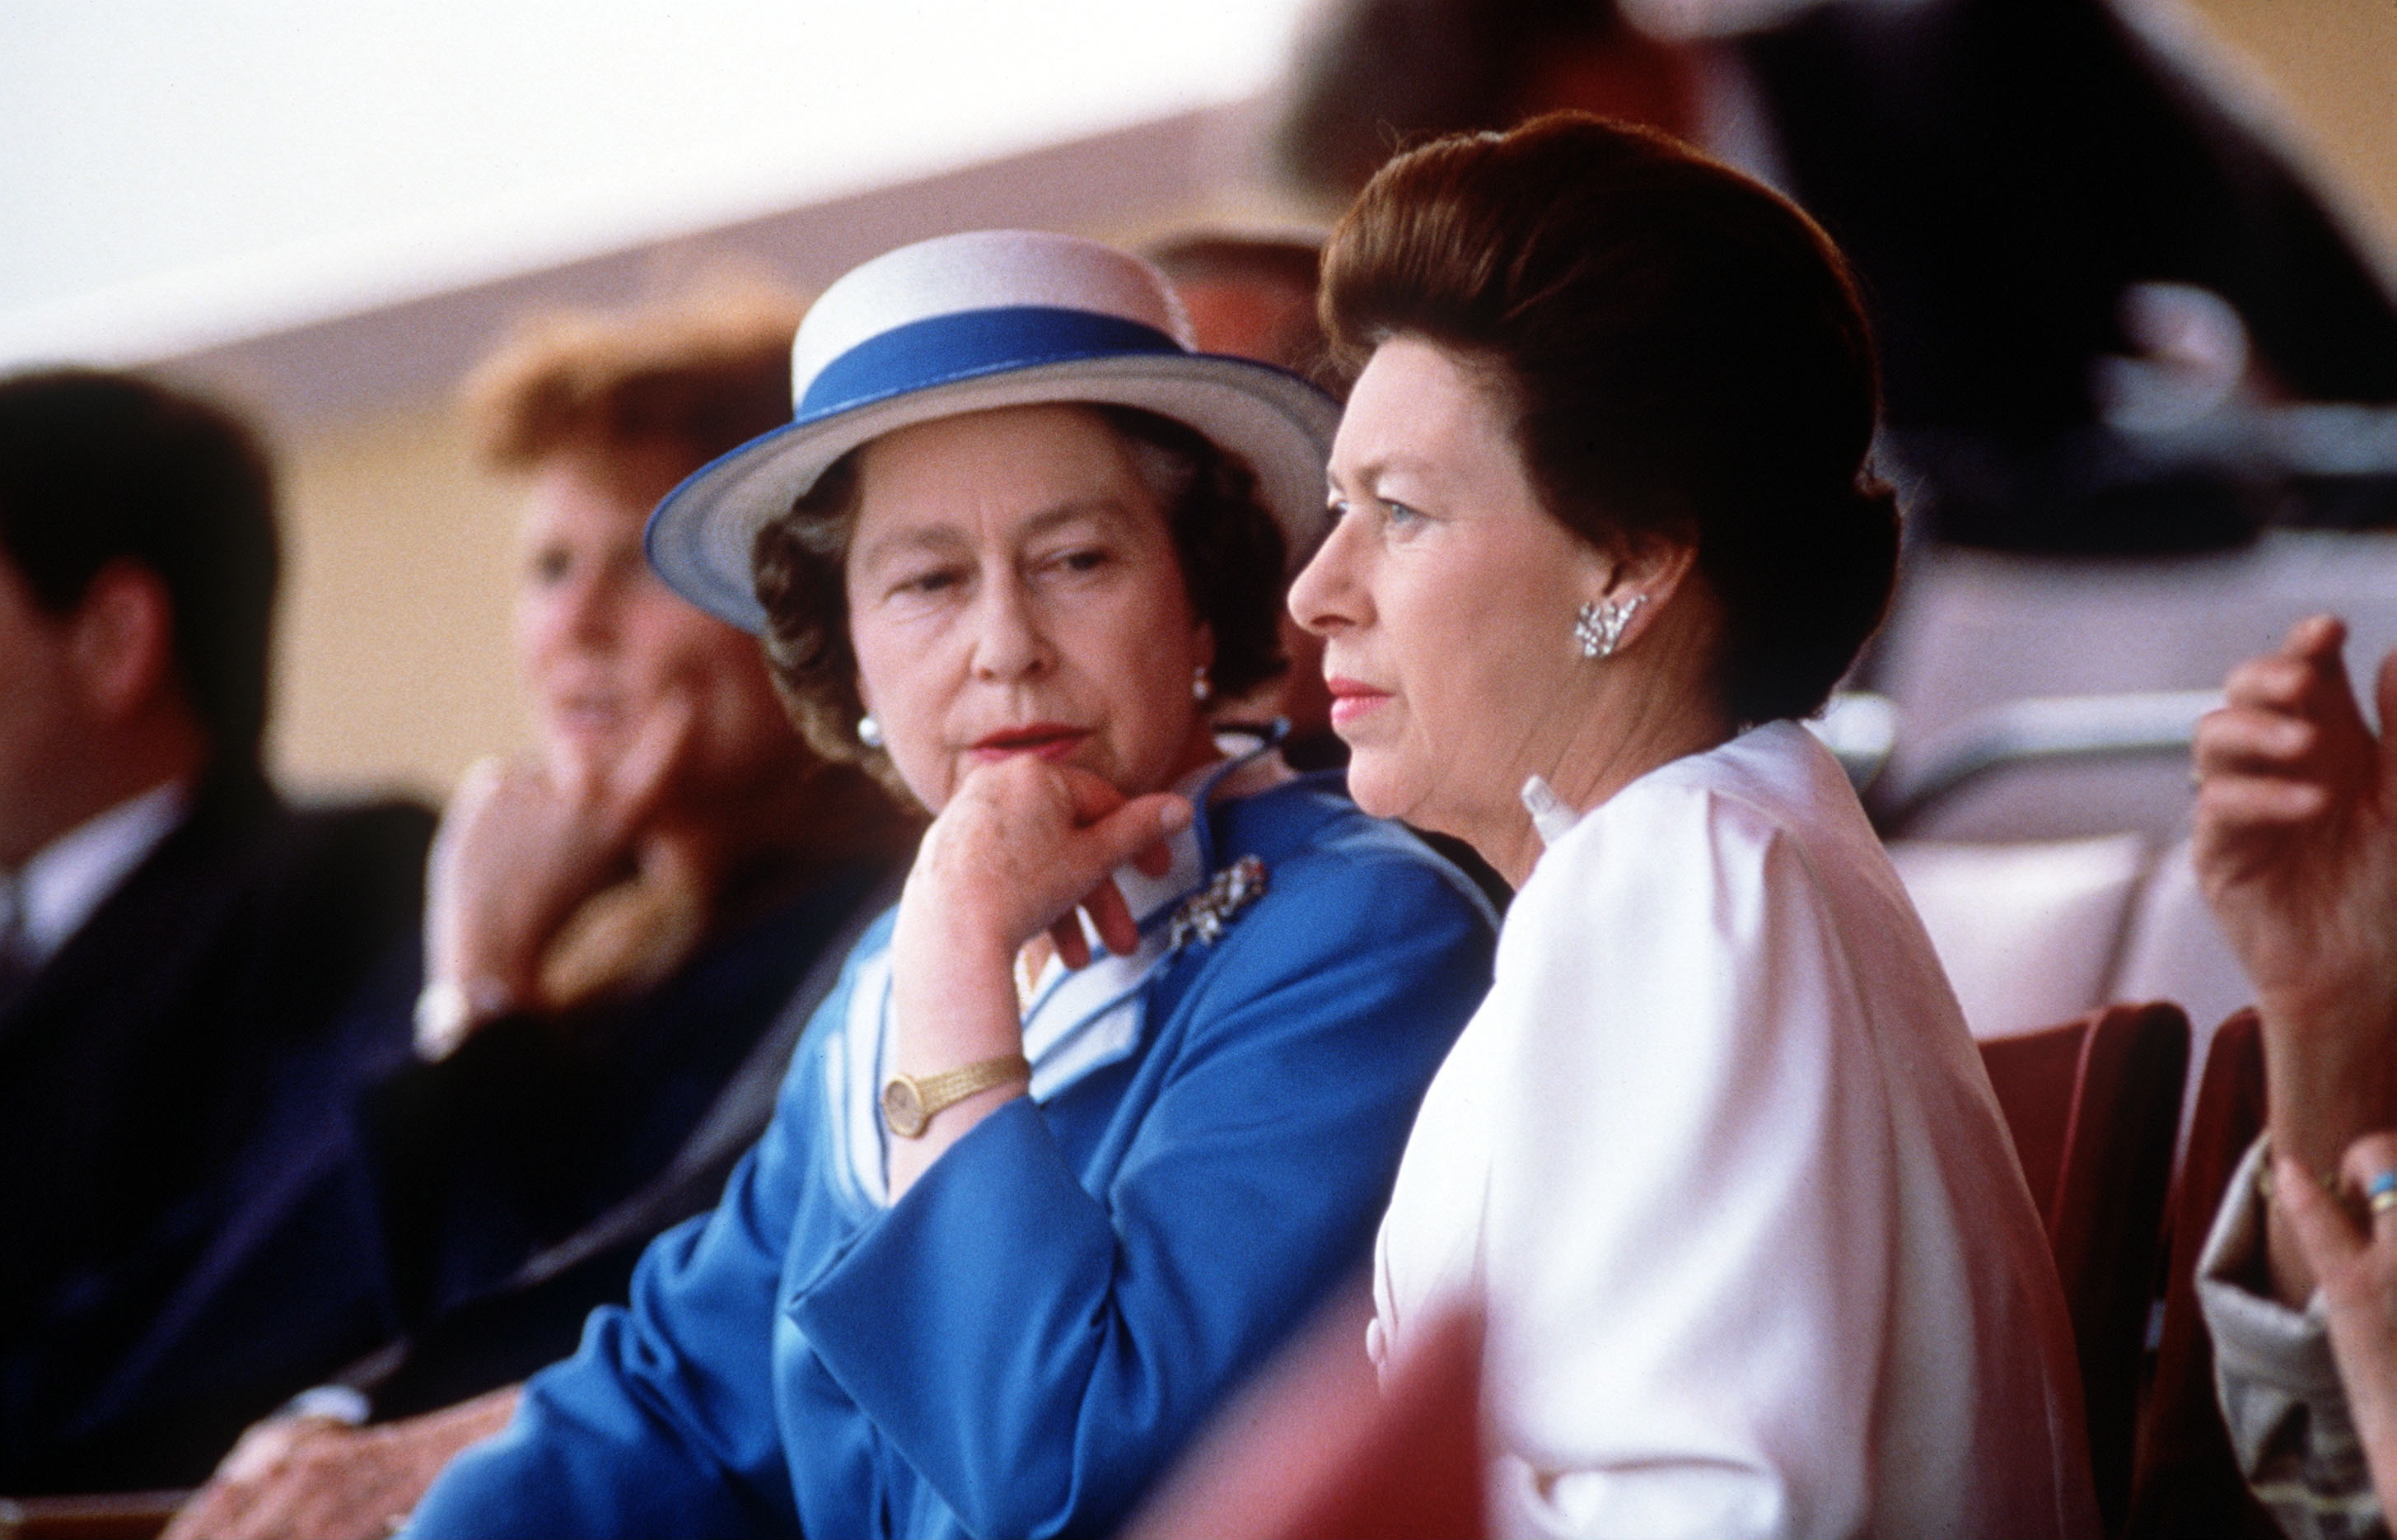 The real-life Queen Elizabeth and Princess Margaret sitting together